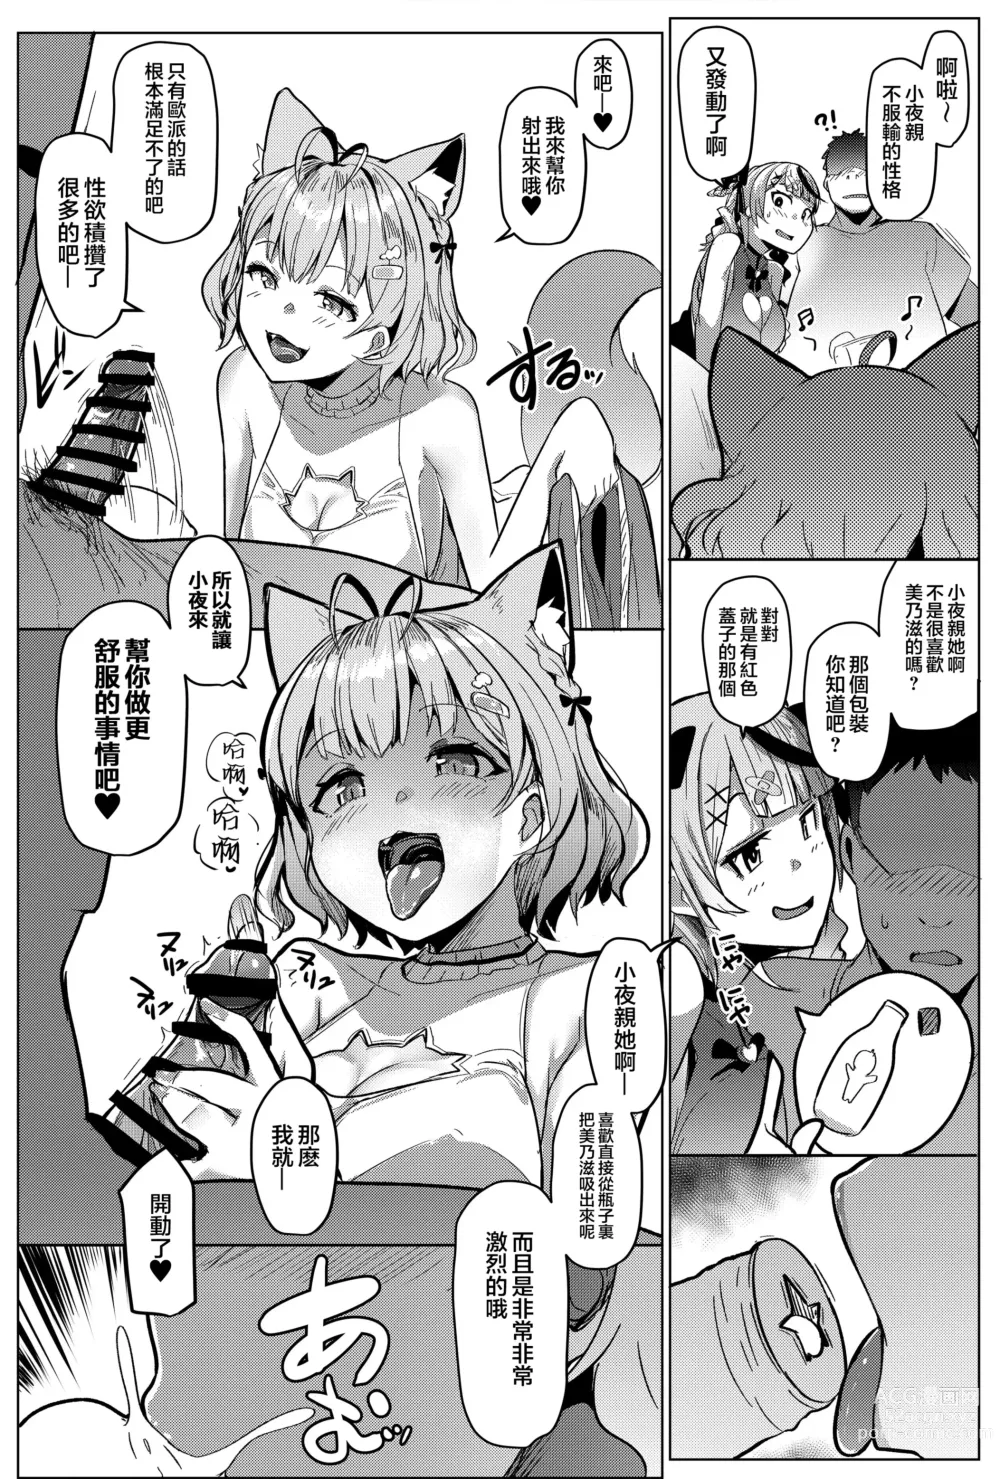 Page 6 of doujinshi Osucollab 2